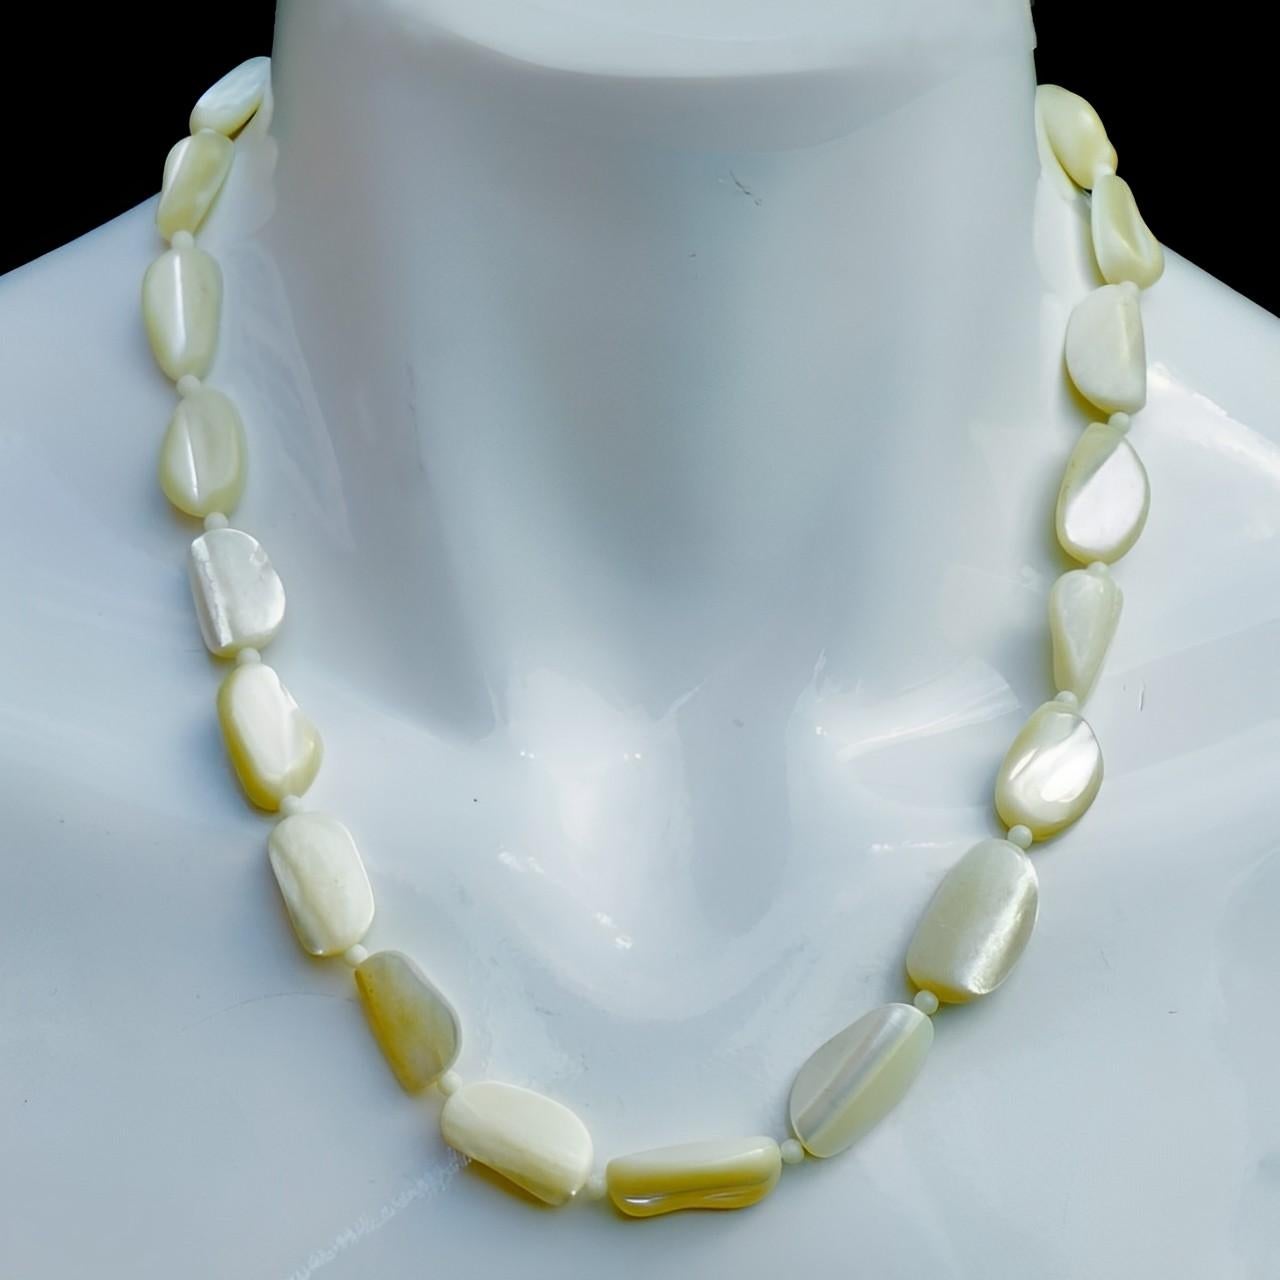 Lovely mother of pearl necklace with irregular shaped beads and small round glass spacers. Measuring necklace length 47.5 cm / 18.7 inches. The silver tone clasp is a little stiff but works. The necklace is in very good condition.

This all original